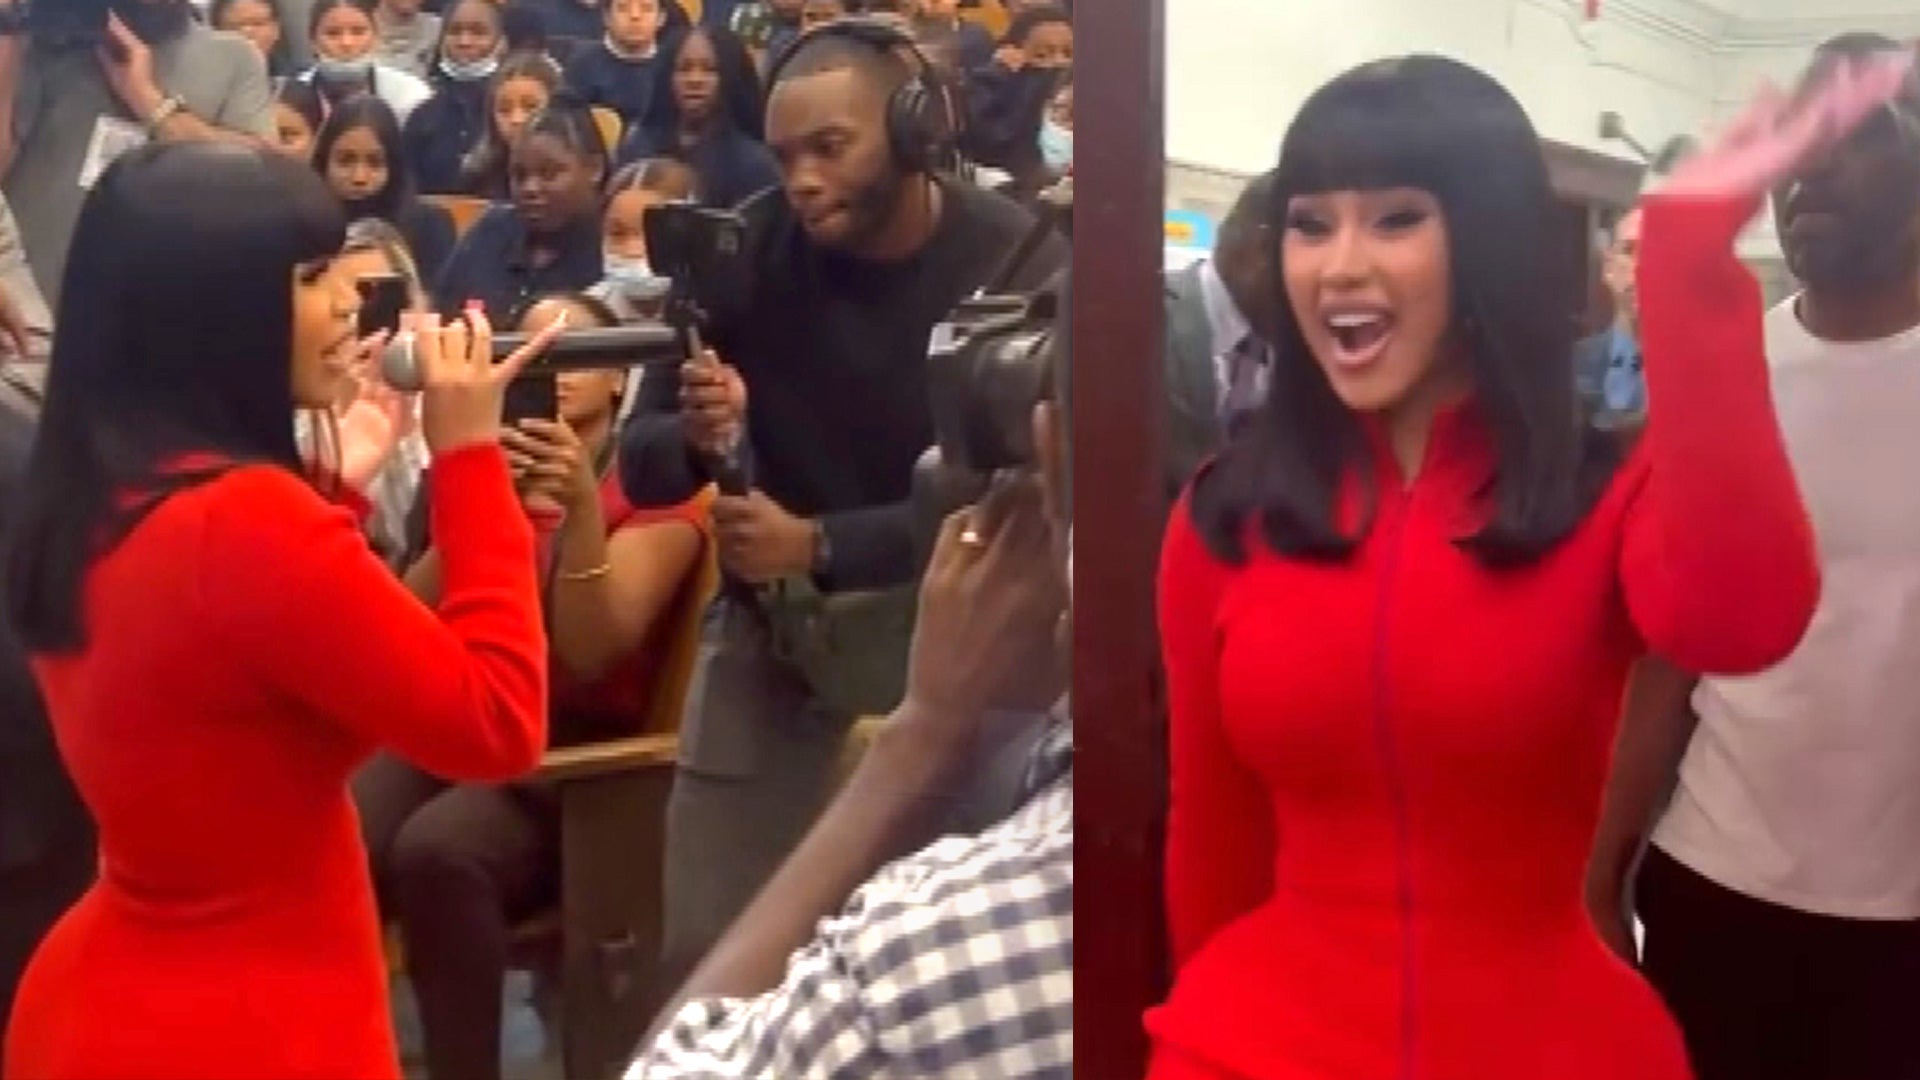 Cardi B Donates $100K to Her School in the Bronx, Surprises Students in  Sweet Moment | Entertainment Tonight